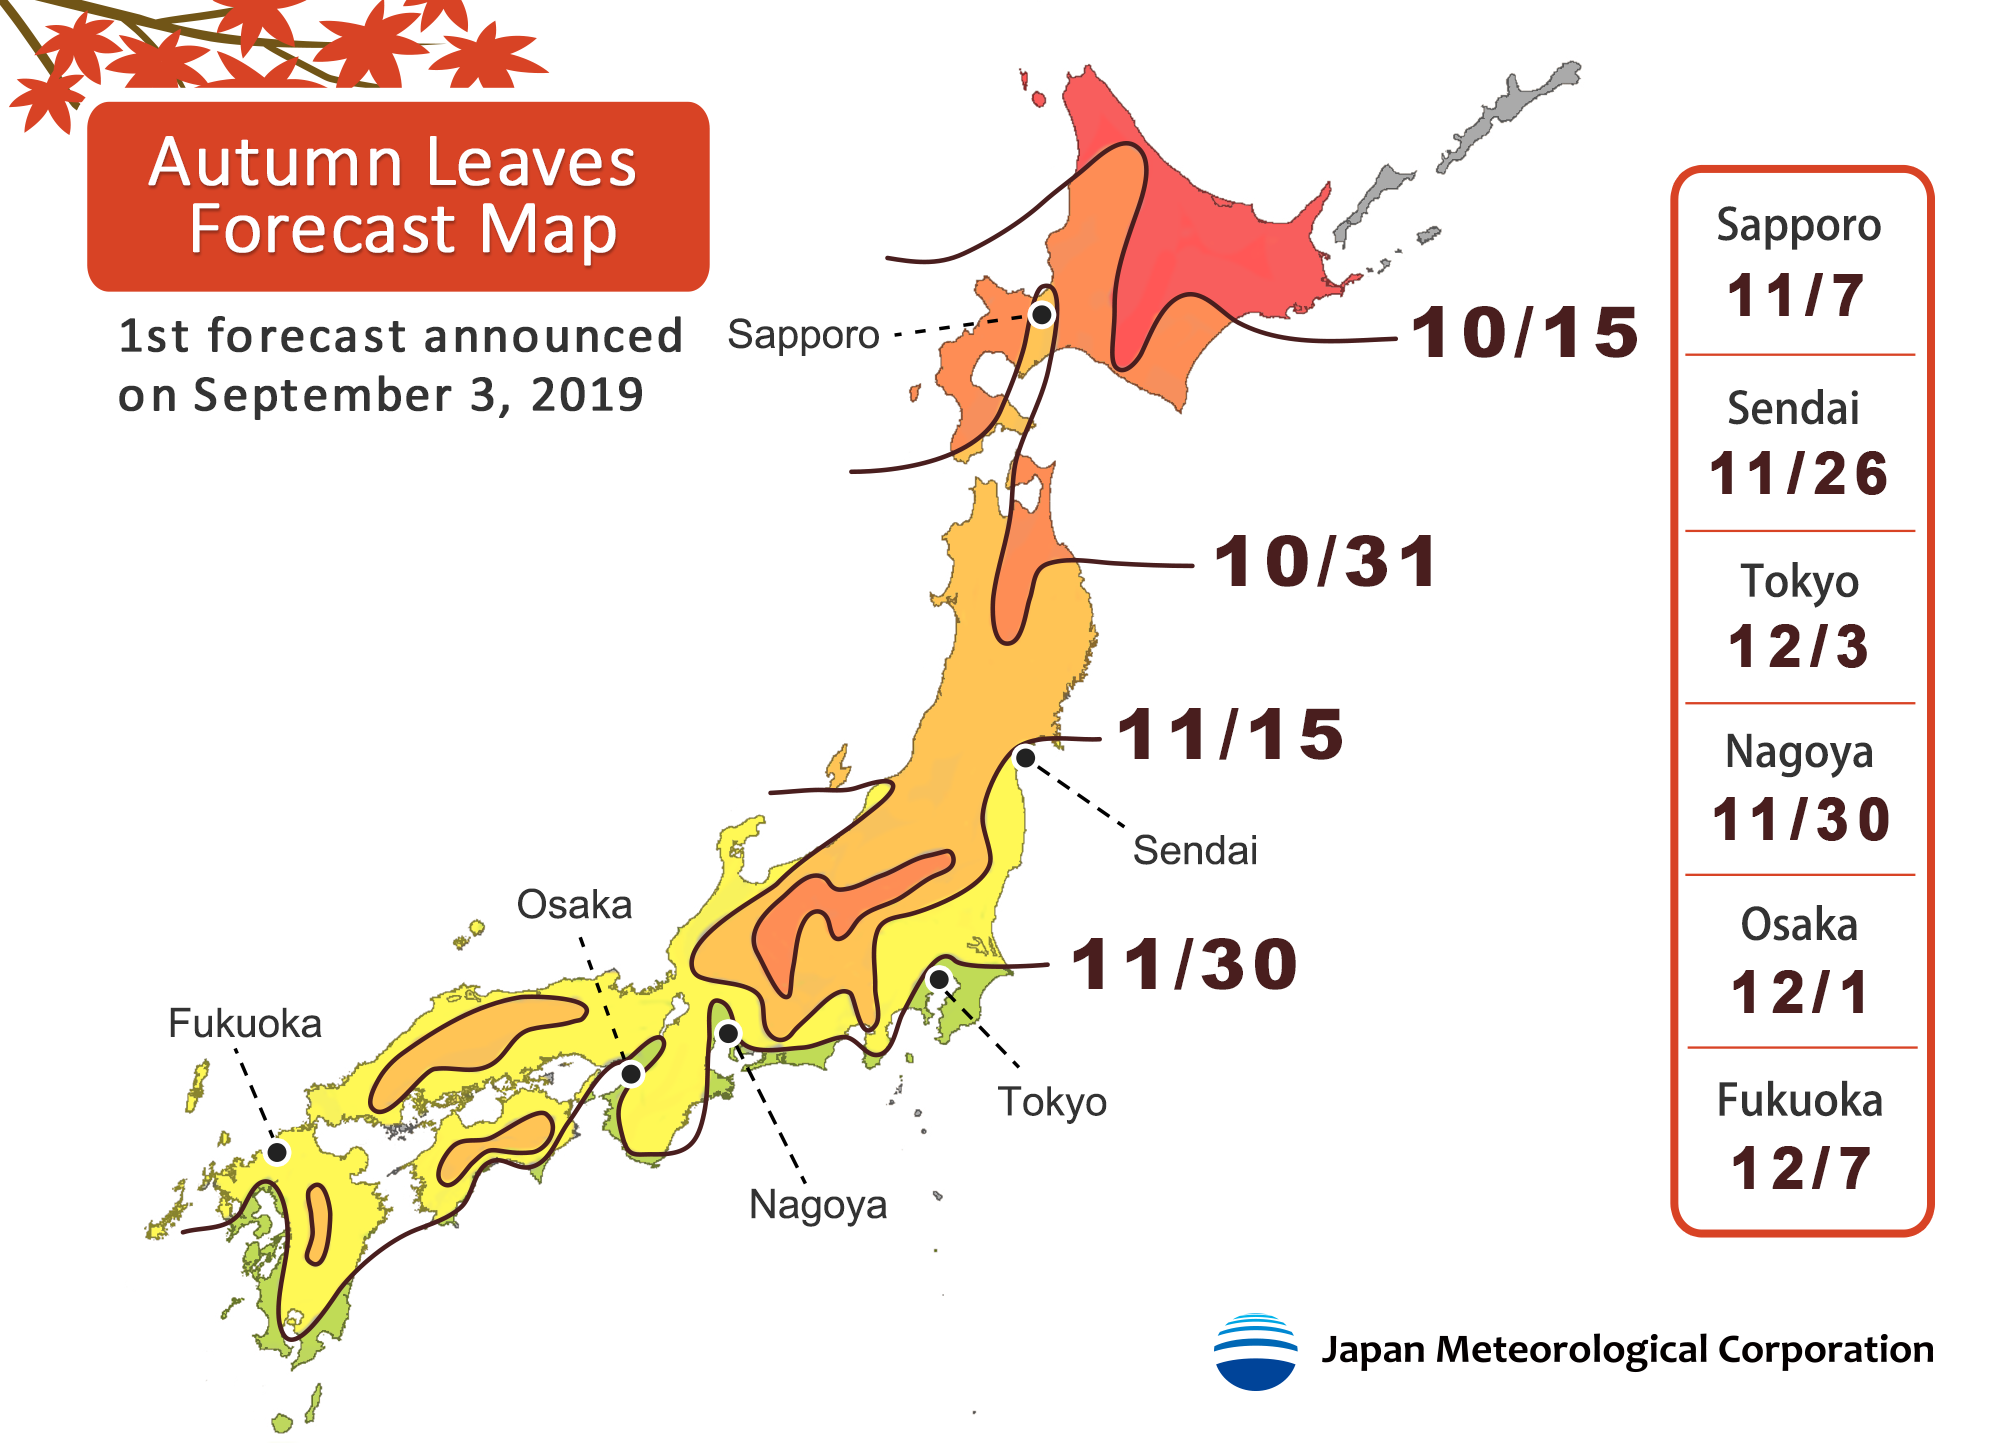 High temperatures may delay appearance of autumn foliage in Japan